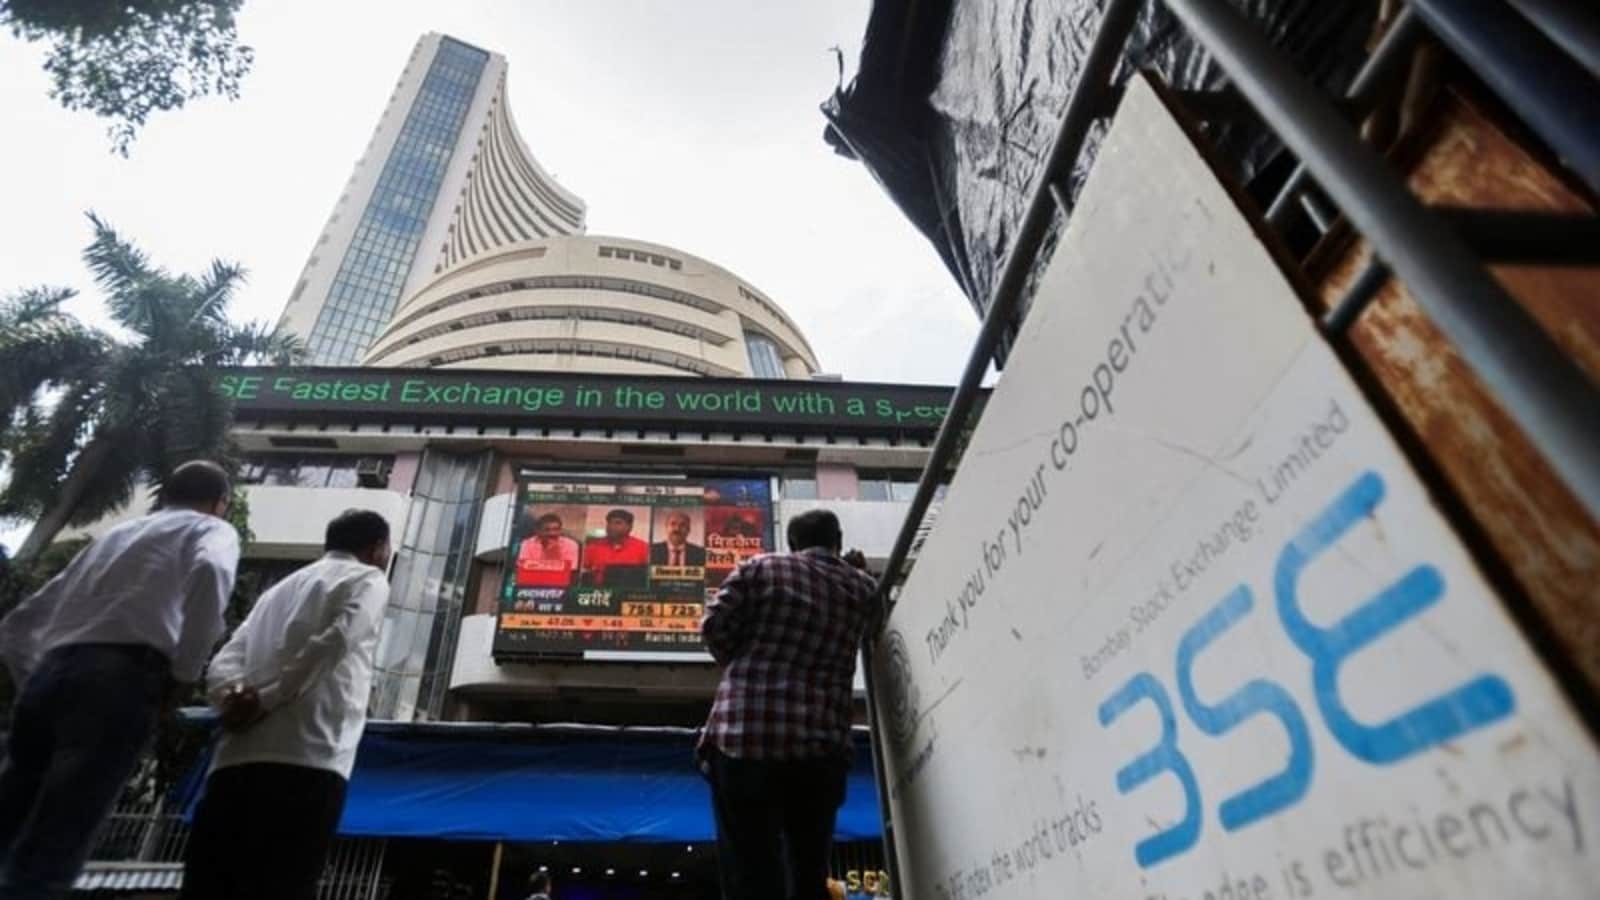 Sensex opens in the red, tumbles over 500 points; Nifty stays above 17,200